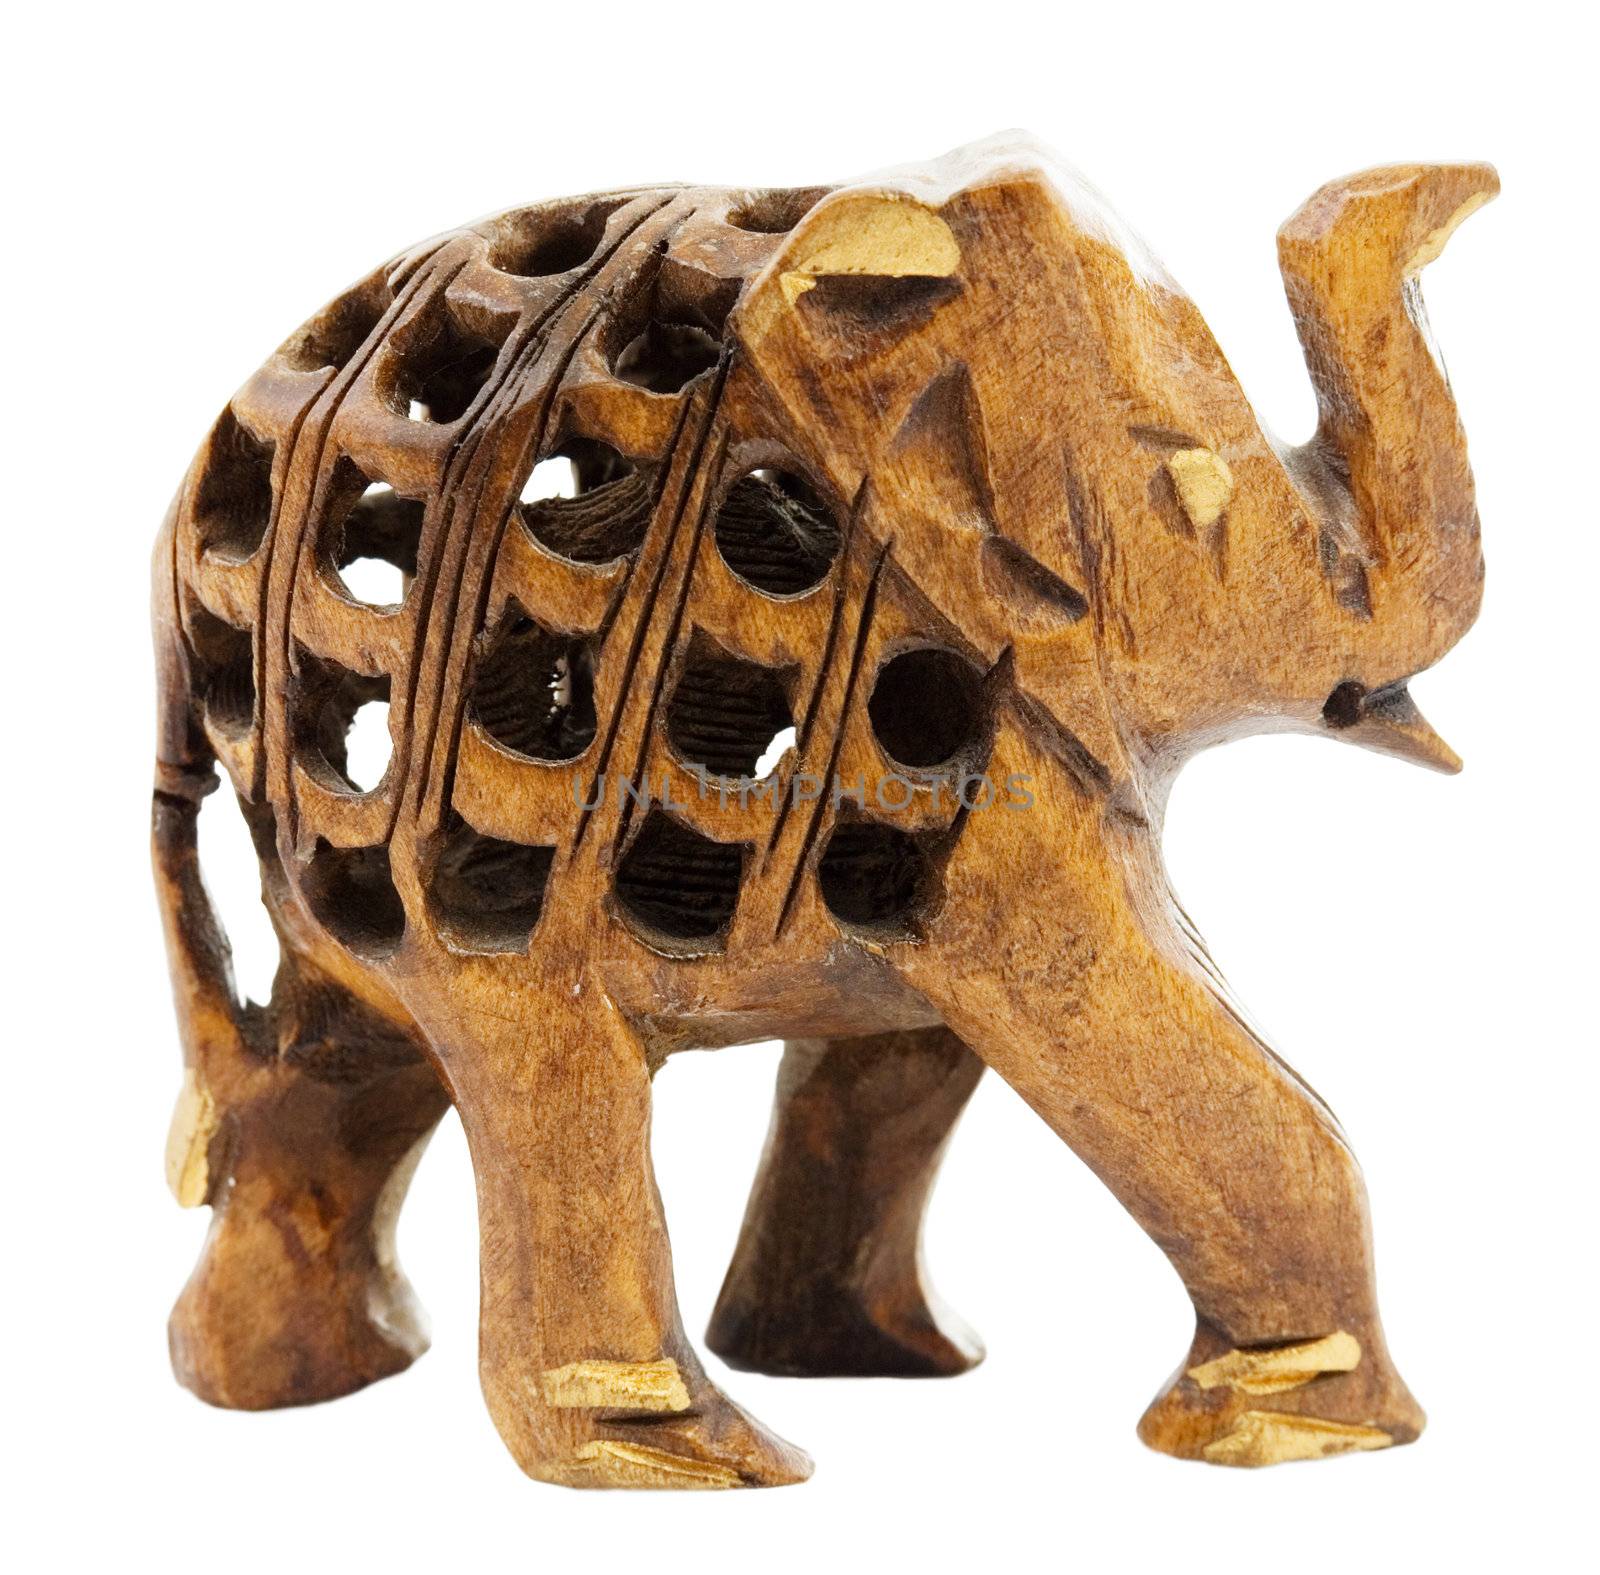 Wooden hand-made  statuette of elephant a white background